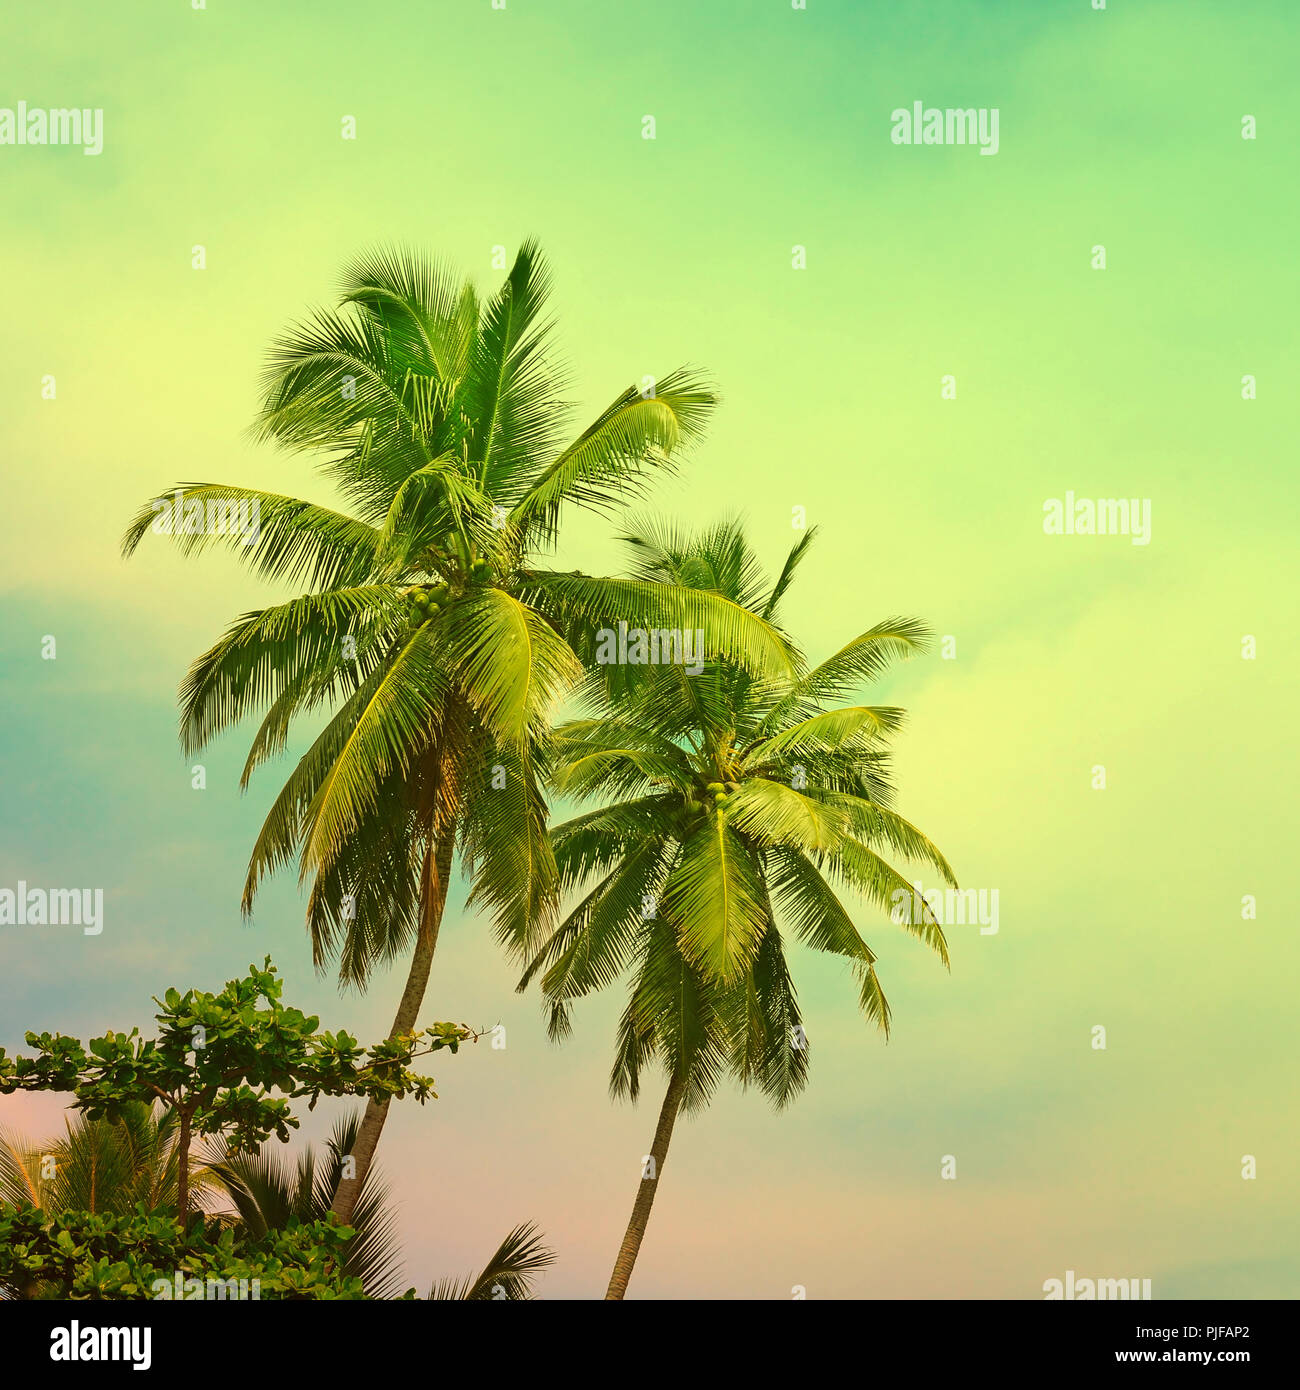 Toned tropical palm trees on sunny fantastic sky with abstract clouds. Effect of filter and toning. Stock Photo